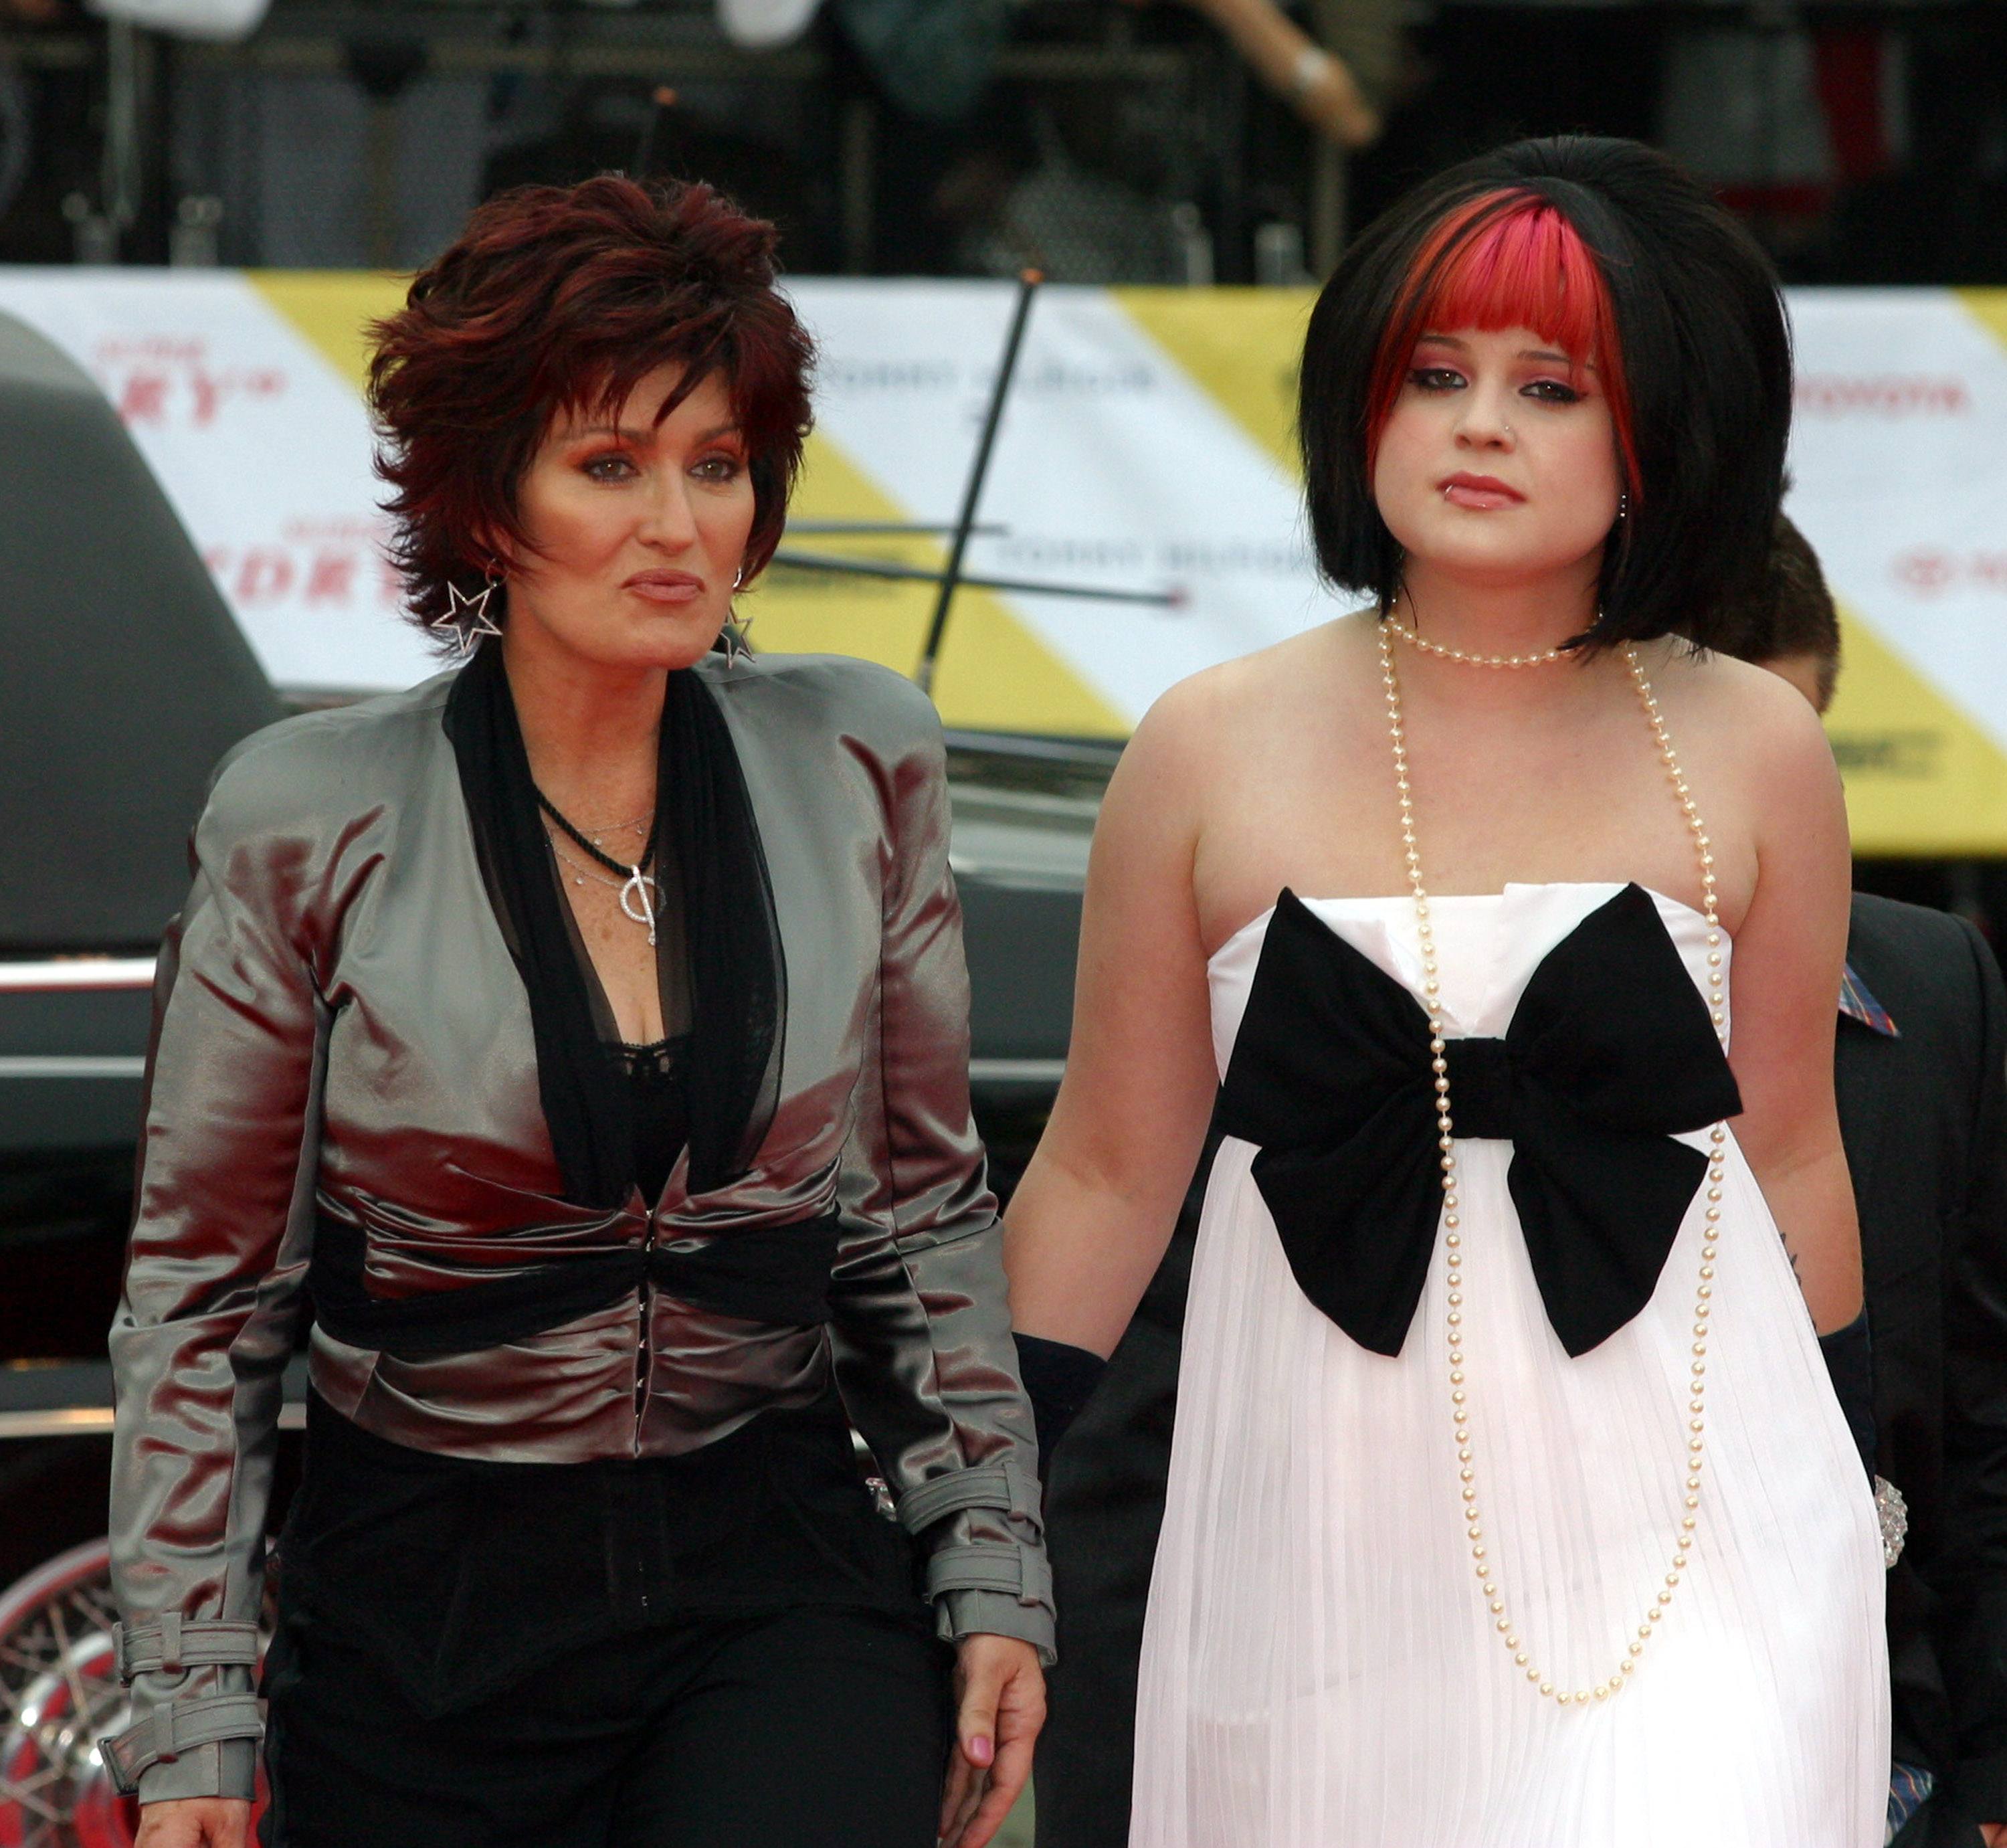 Sharon and Kelly Osbourne arrive at the MTV Video Music Awards Japan 2004 on May 23, 2004 in Tokyo, Japan.